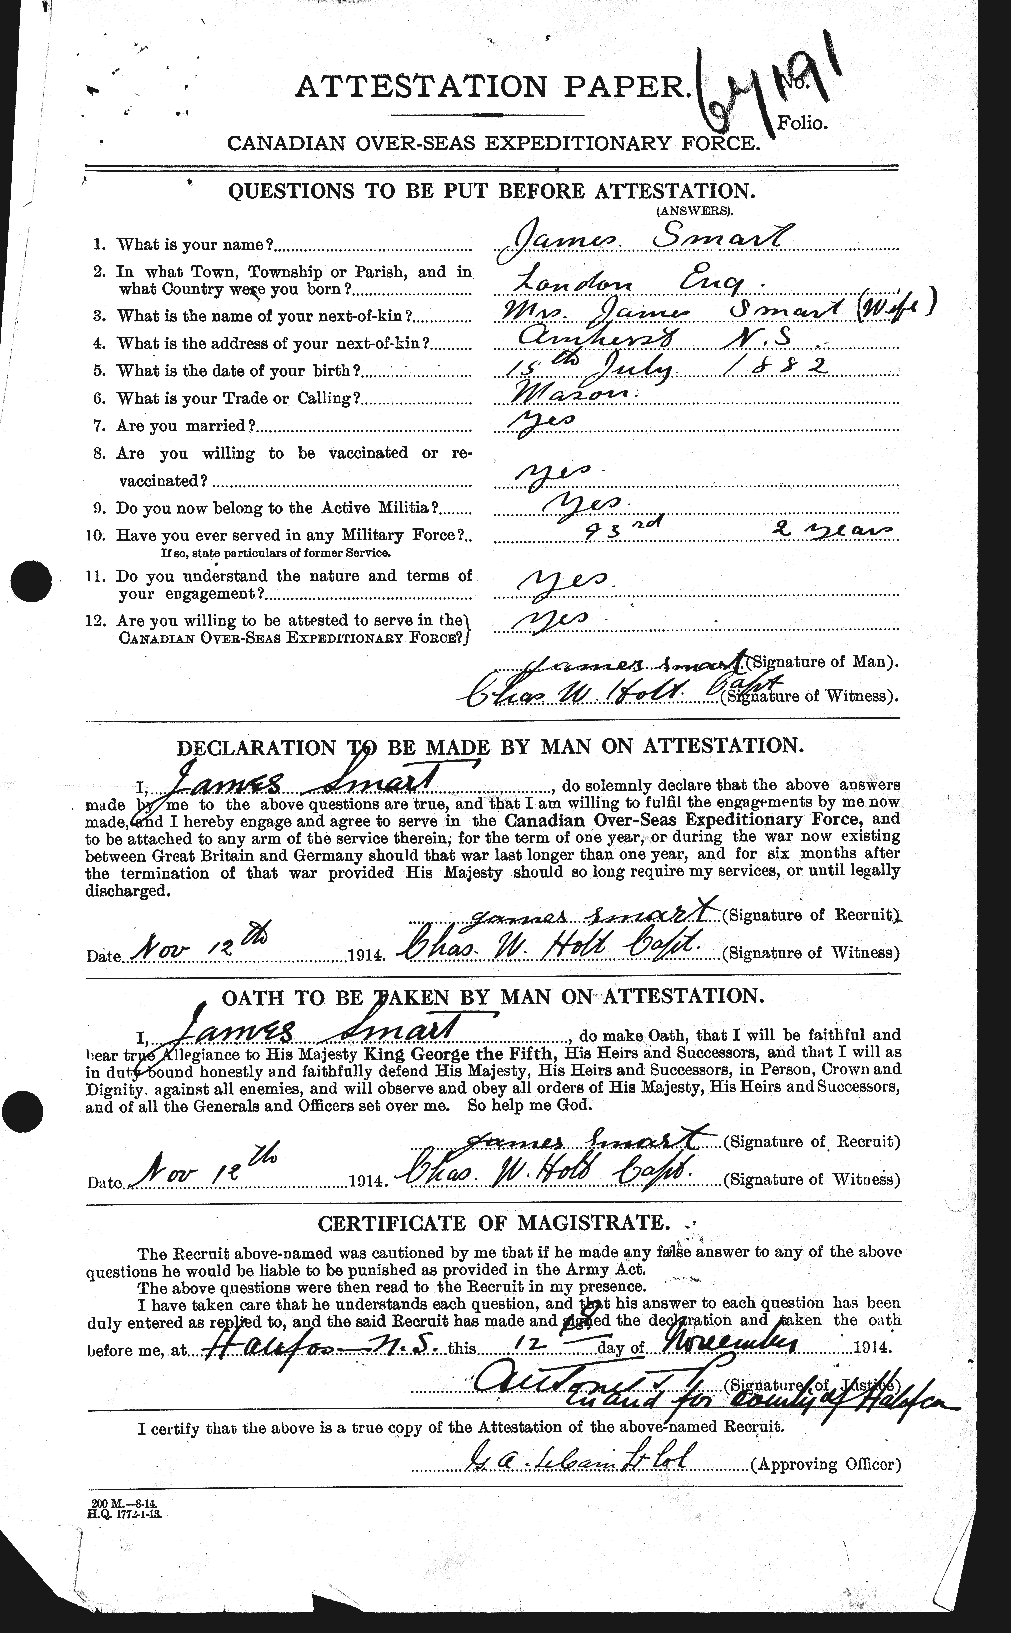 Personnel Records of the First World War - CEF 102850a